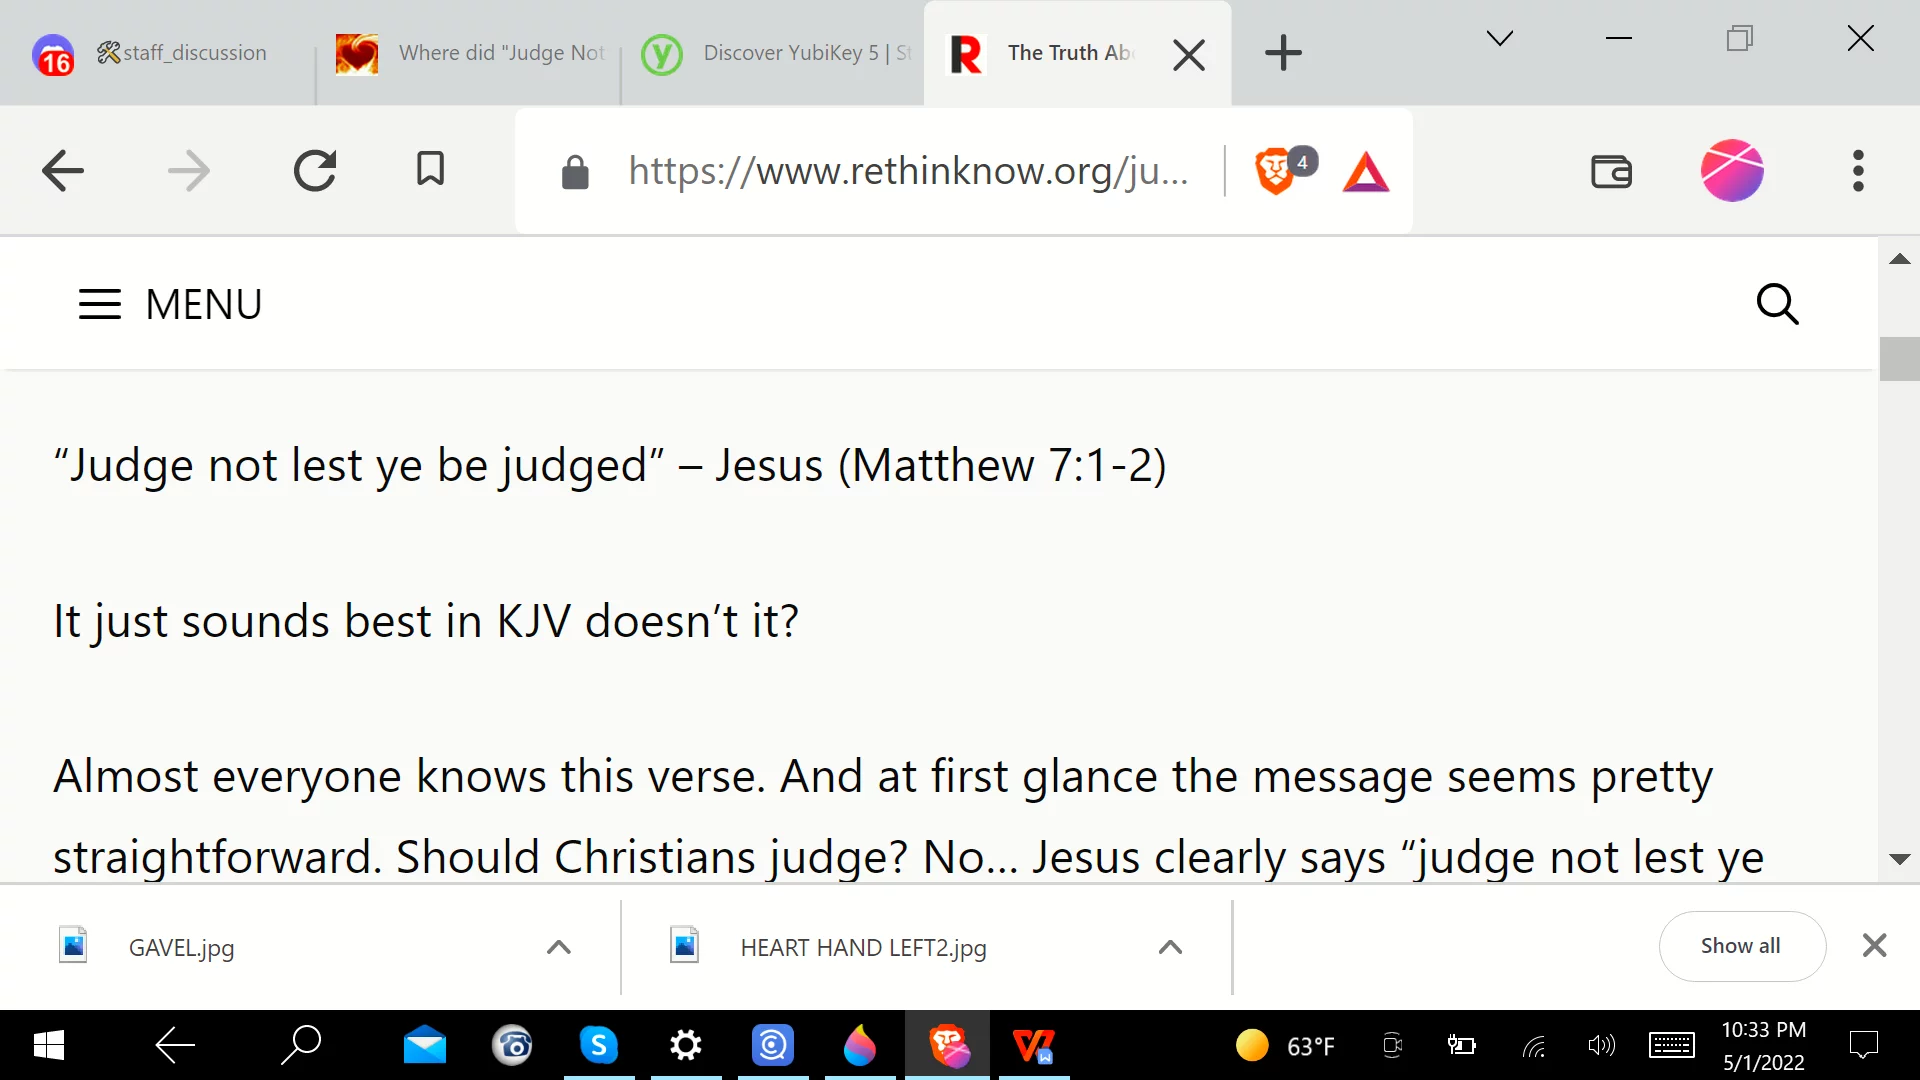 judge not lest ye be judged